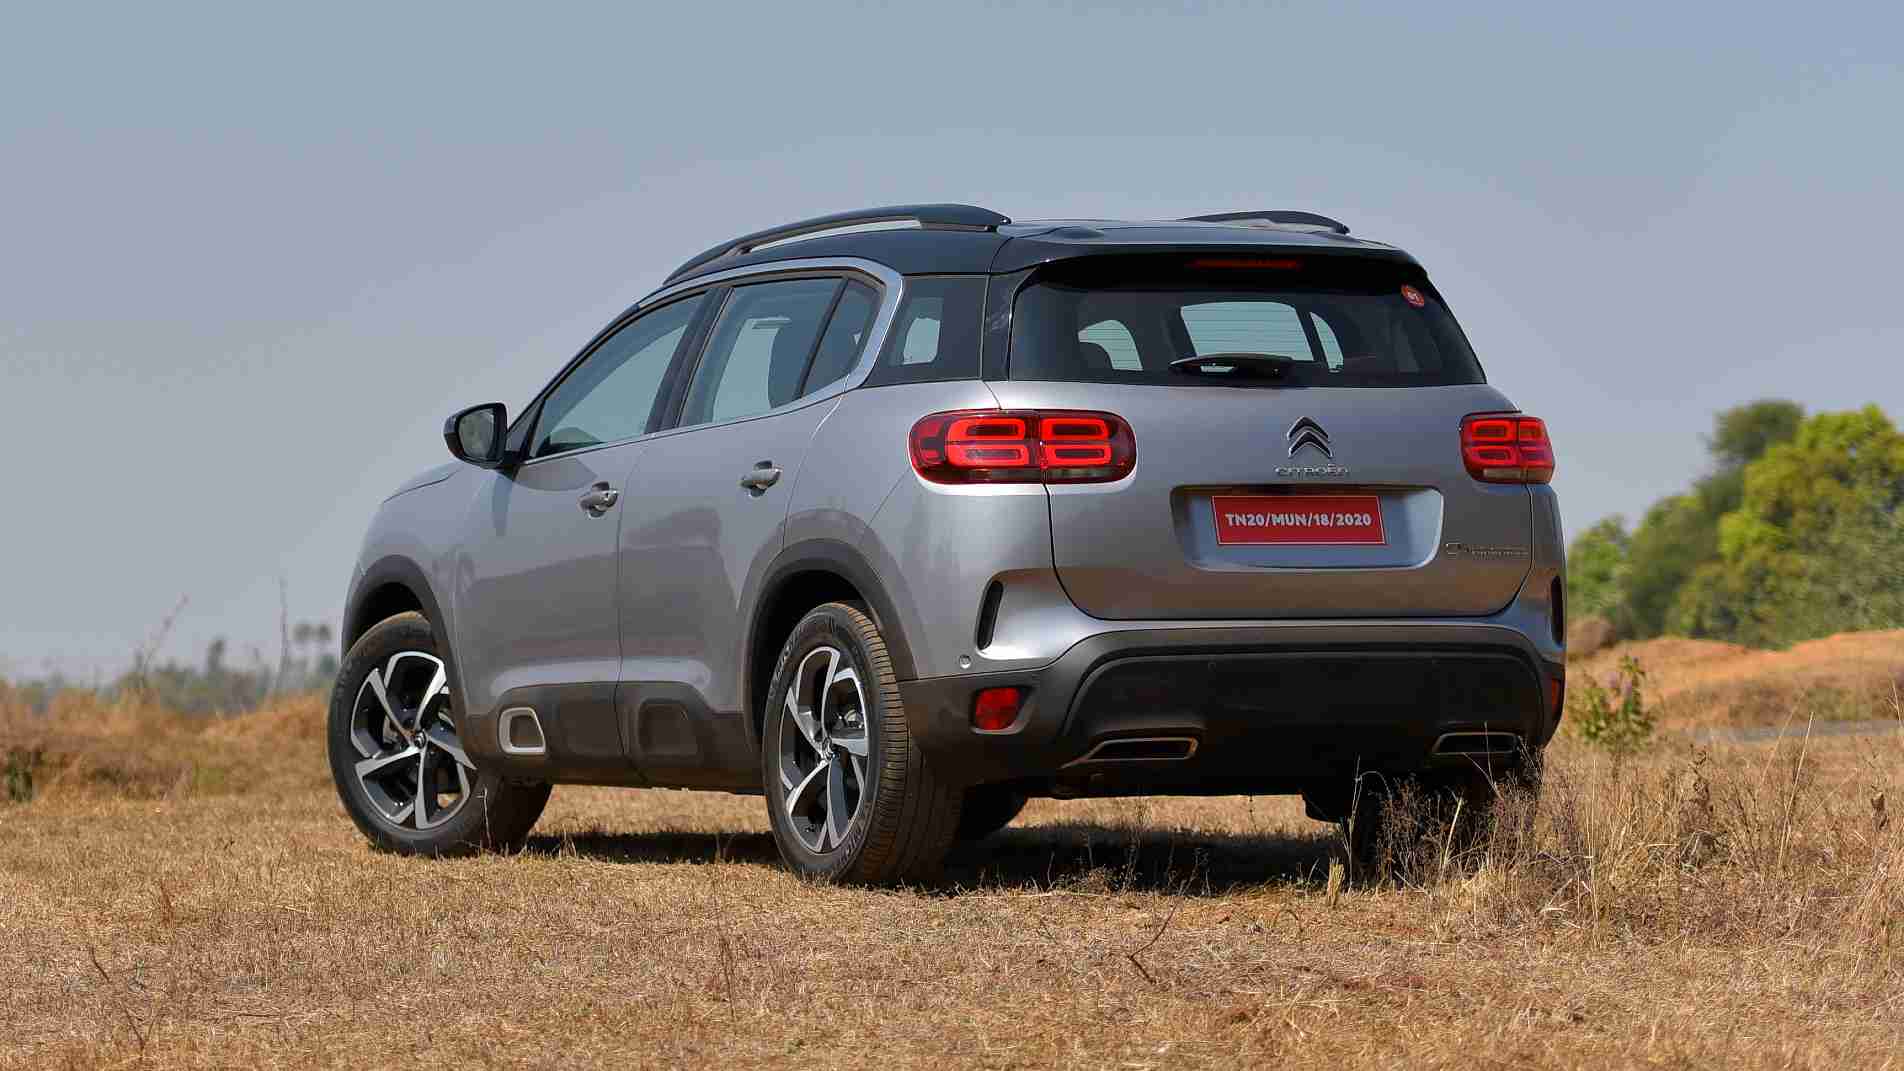 The Citroen C5 Aircross' price in India is expected to be around the Rs 25 - 30 lakh mark. Image: Overdrive/Anis Shaikh